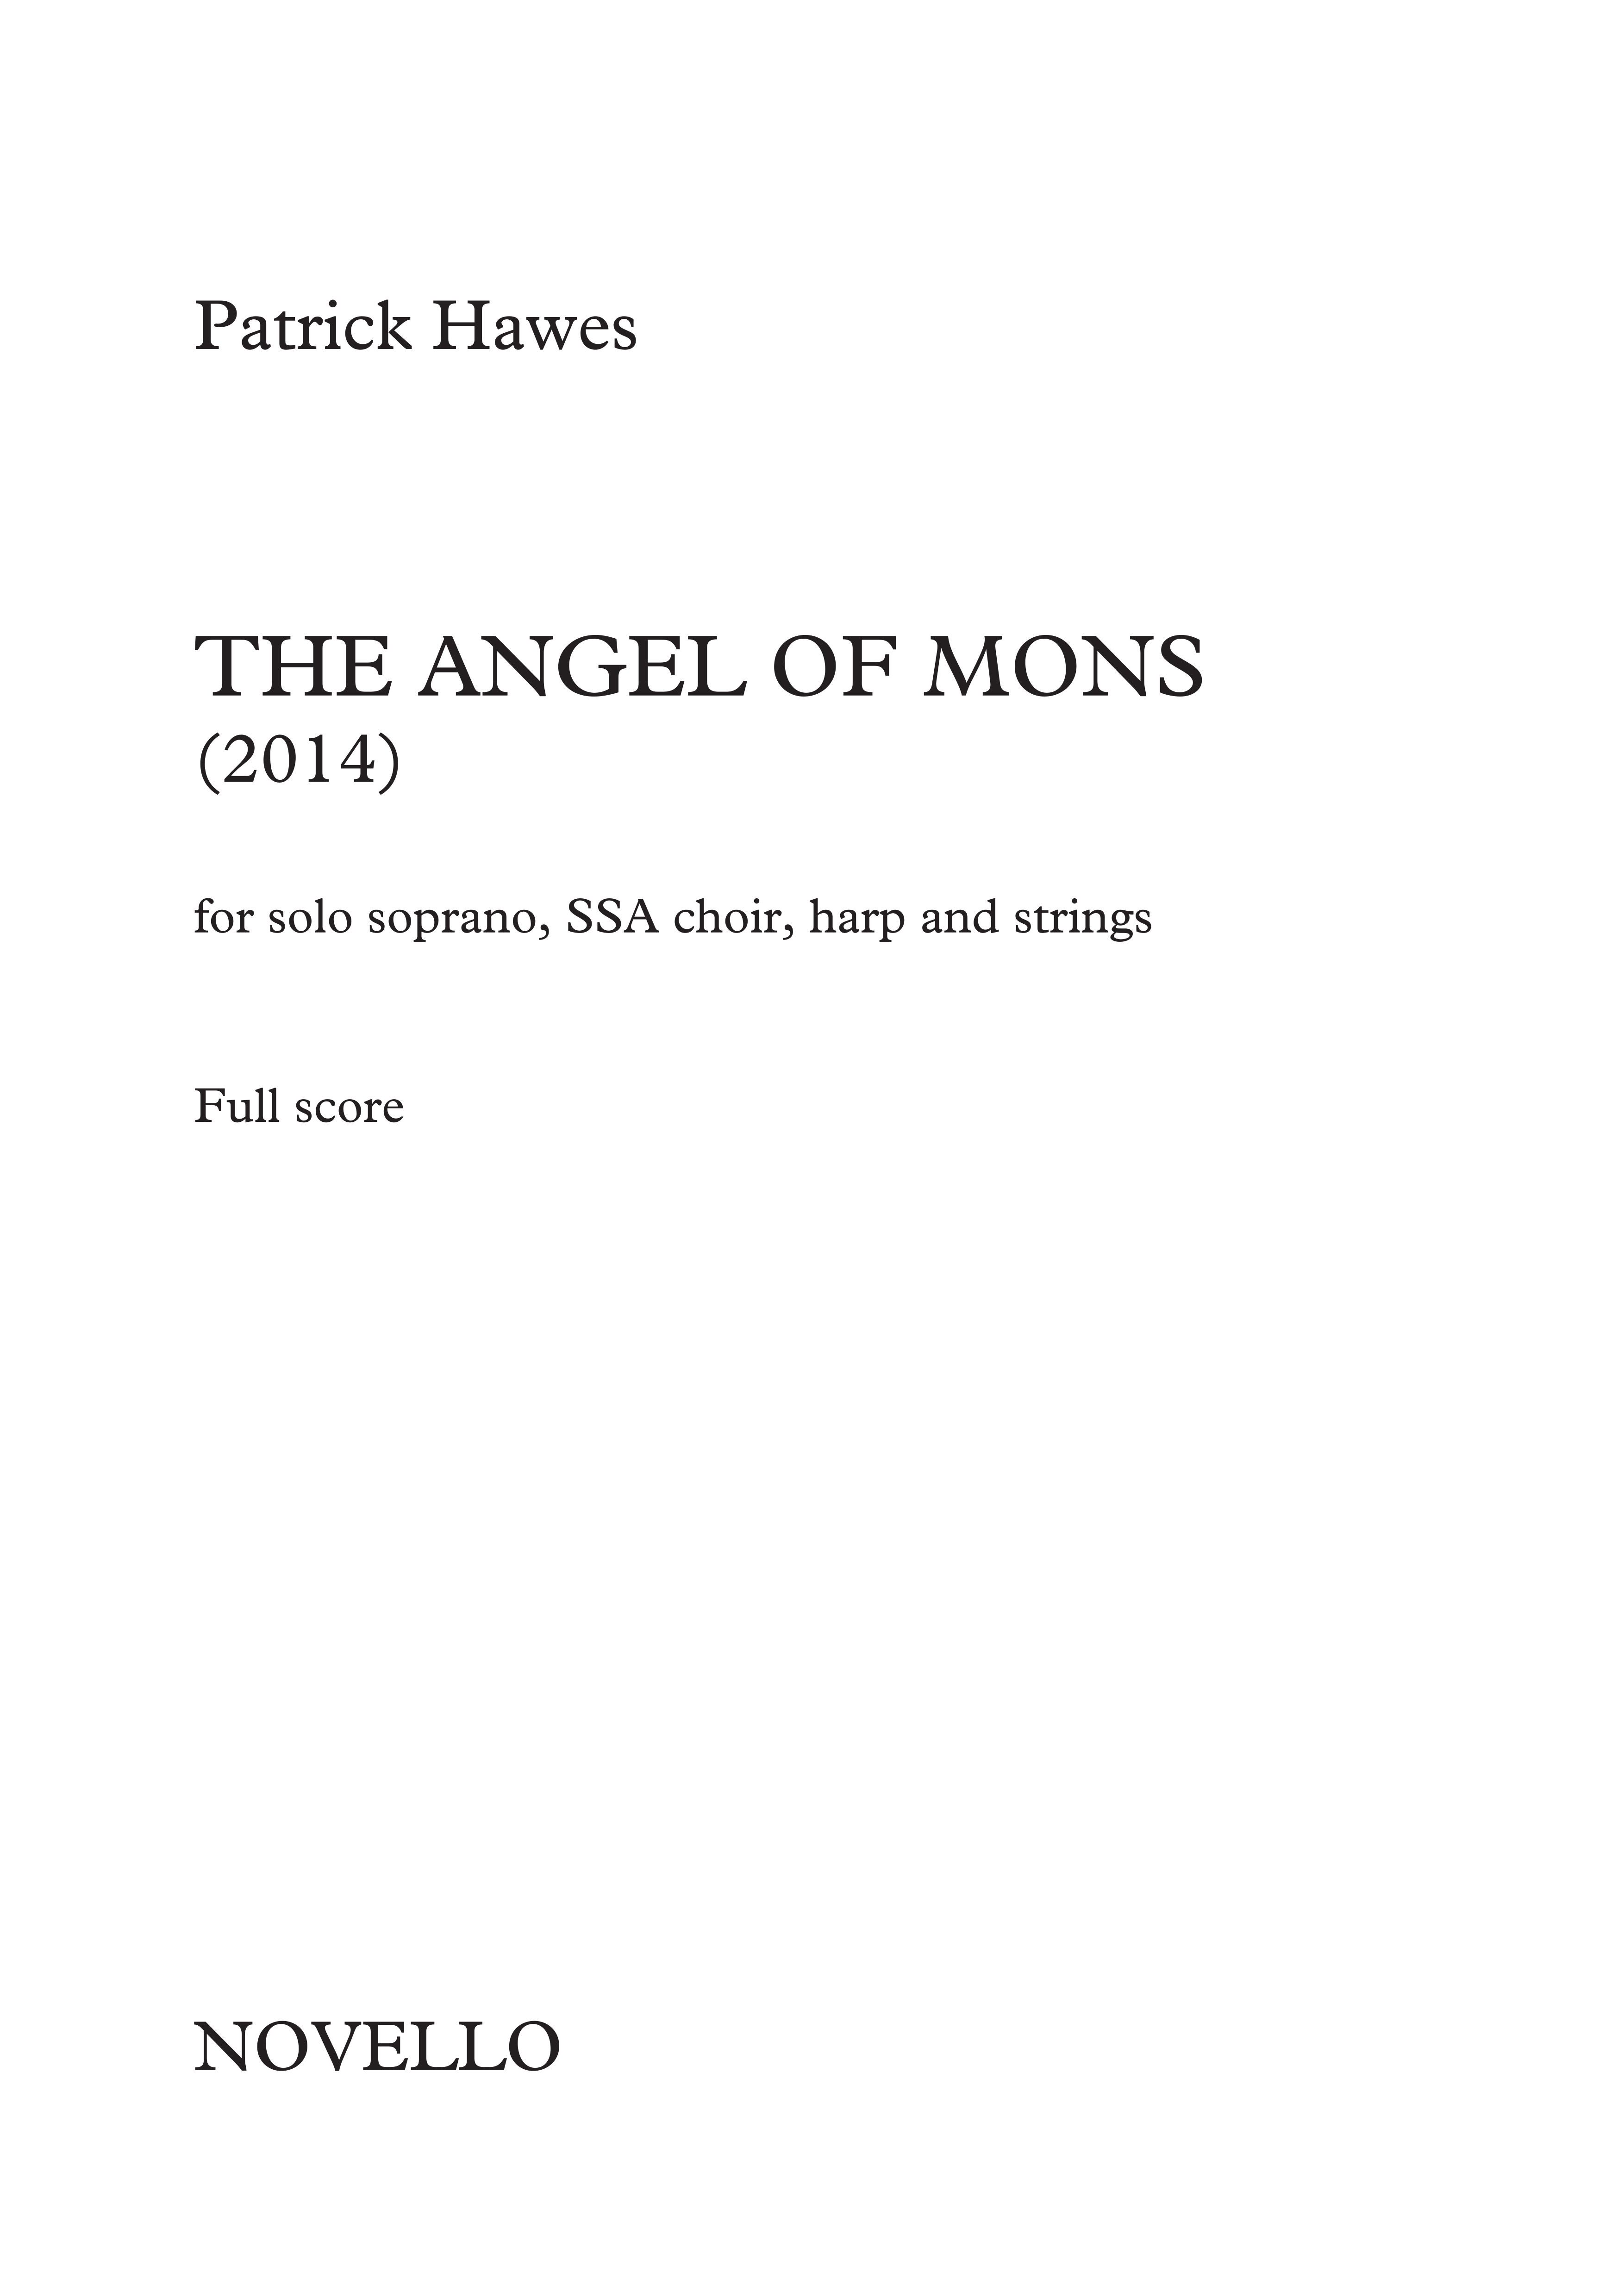 Patrick Hawes: The Angel Of Mons: SSA: Score